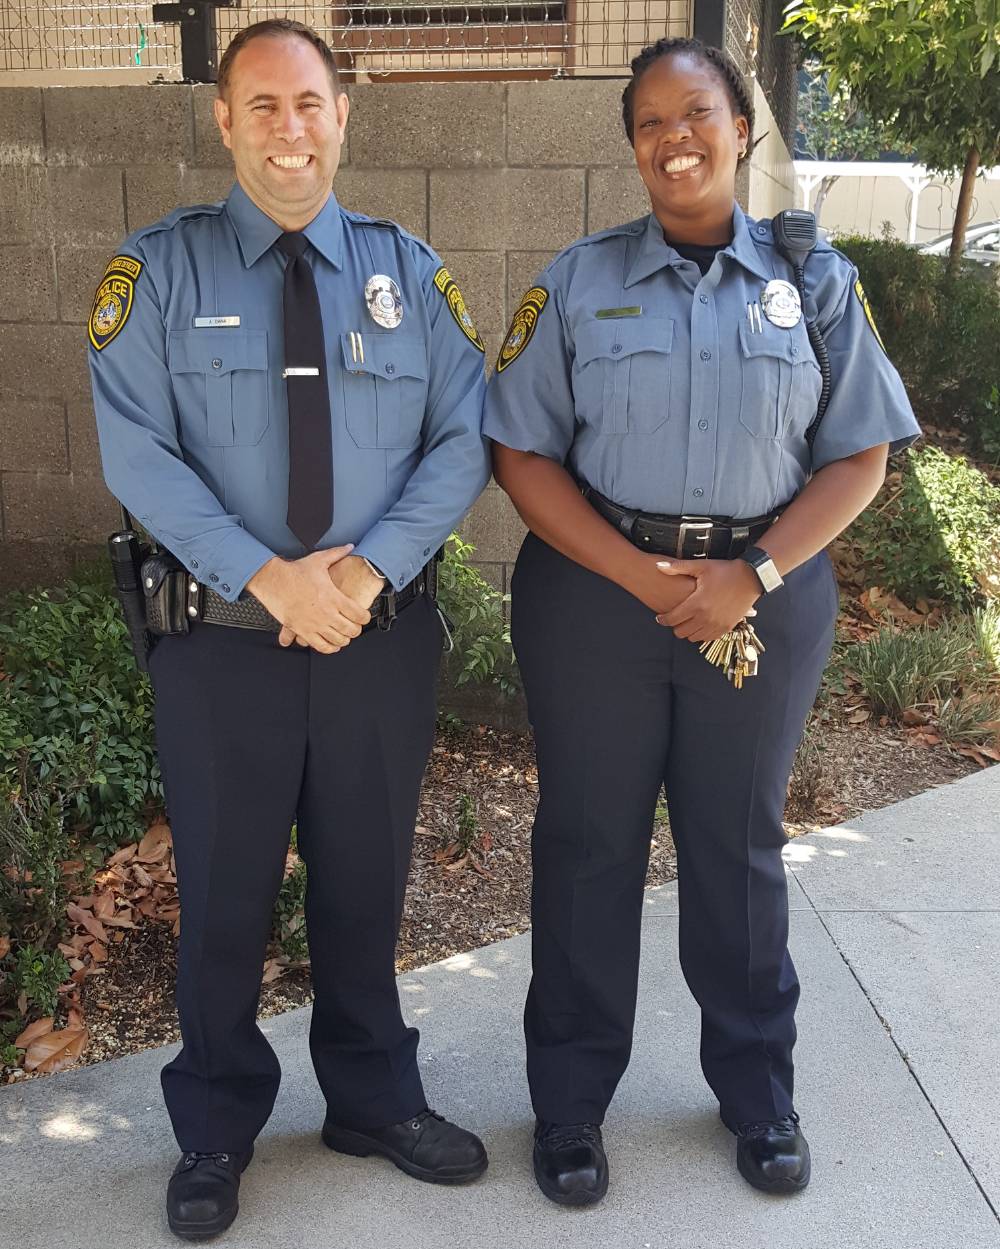 Two college service officers wear the new uniforms